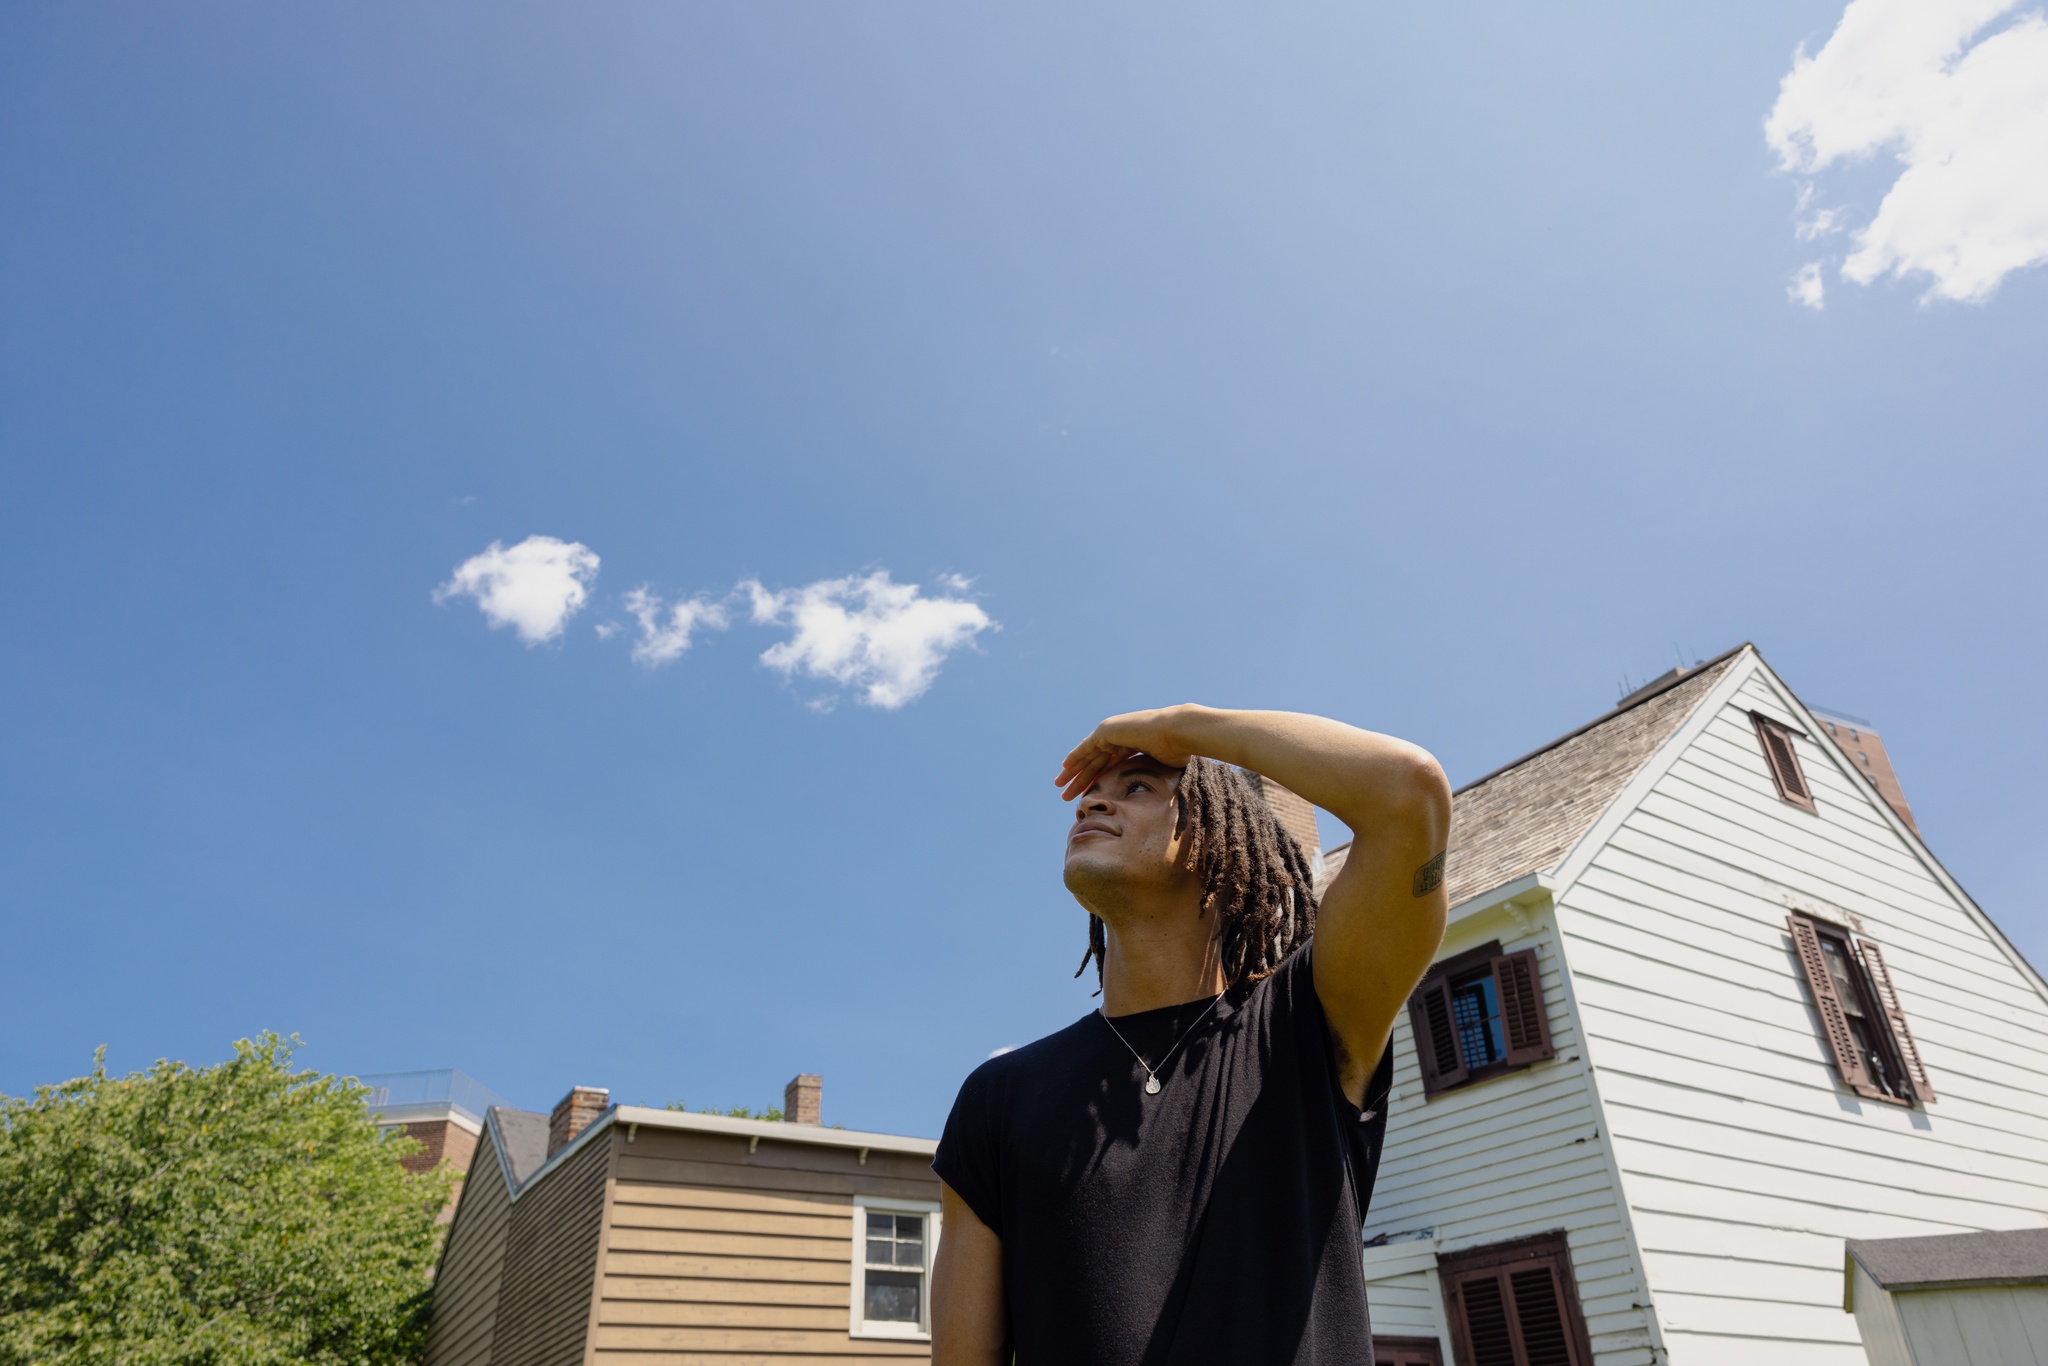 The artist Sandy Williams IV looks up at the blue sky with few clouds above Weeksville Heritage Center. They shield their eyes from the sun.